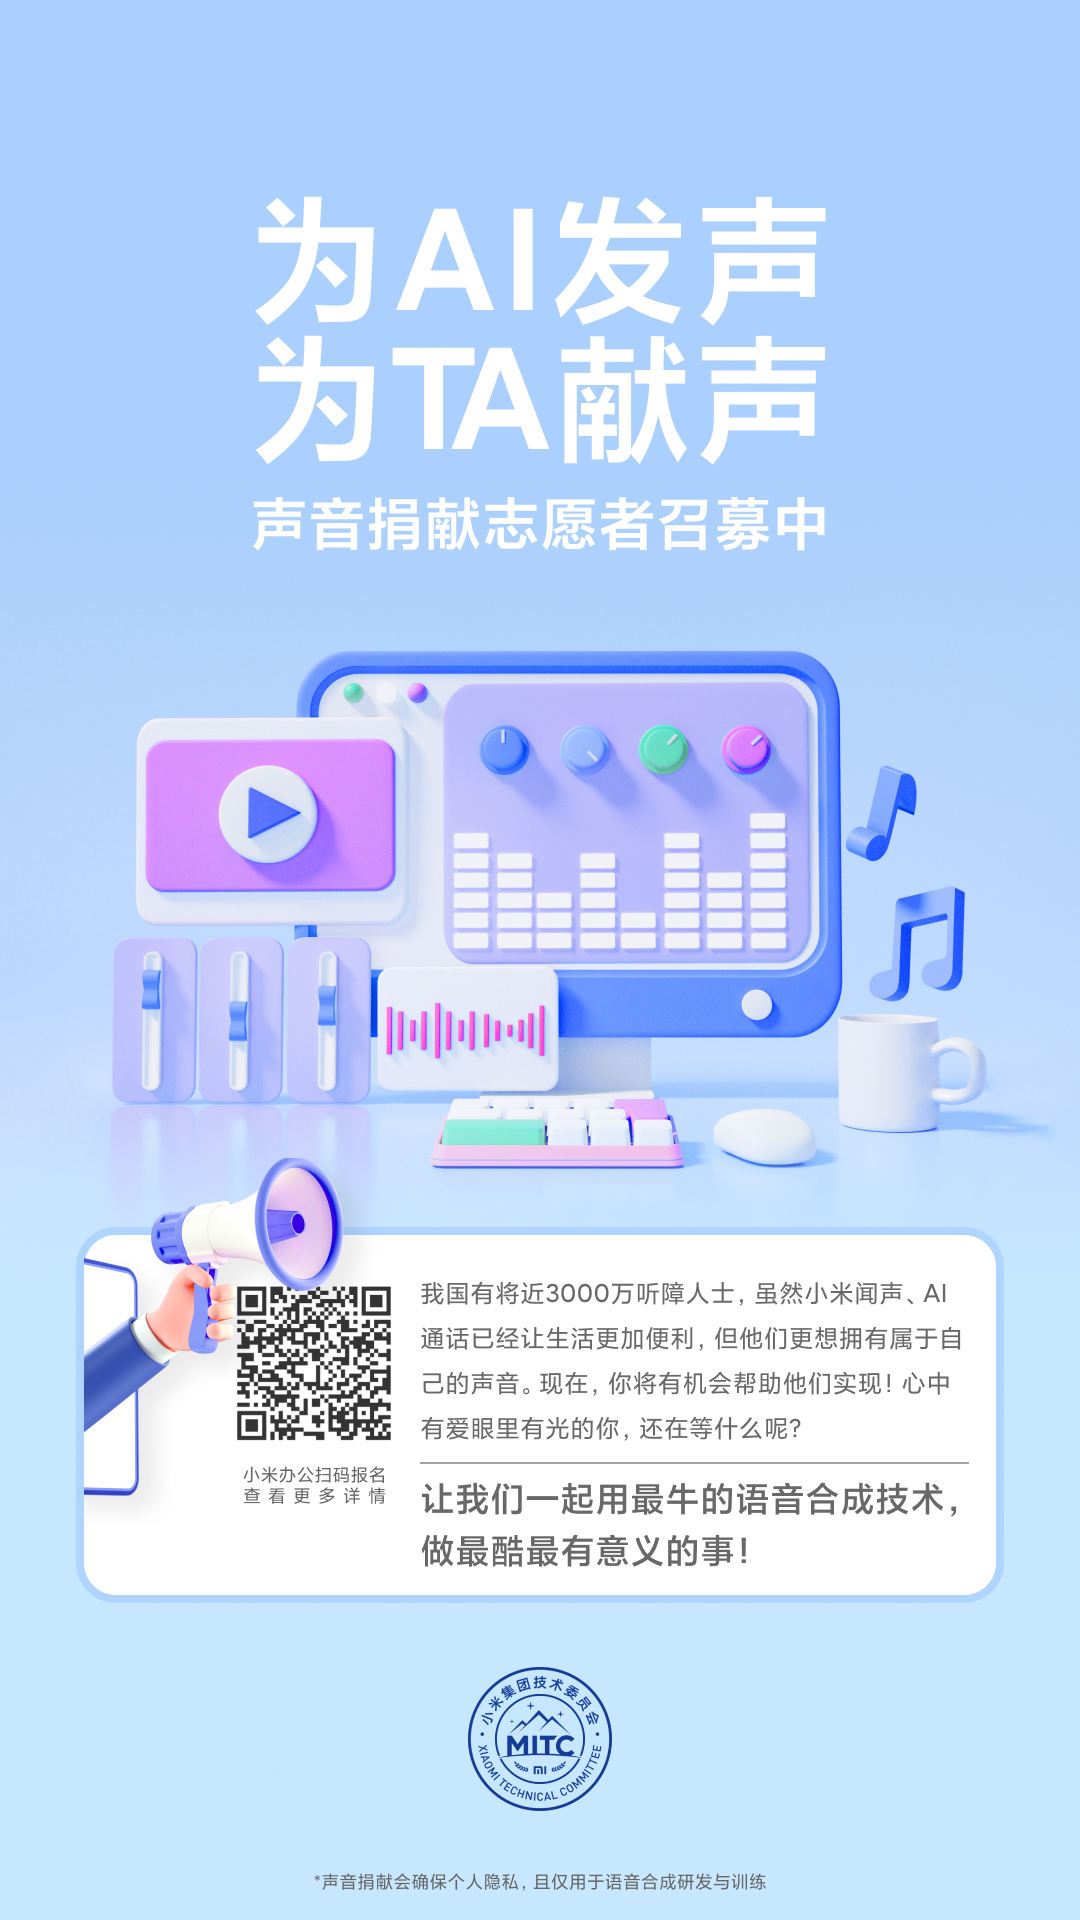 "OWN MY VOICE" Xiaomi  Voice Matching Donation Pro